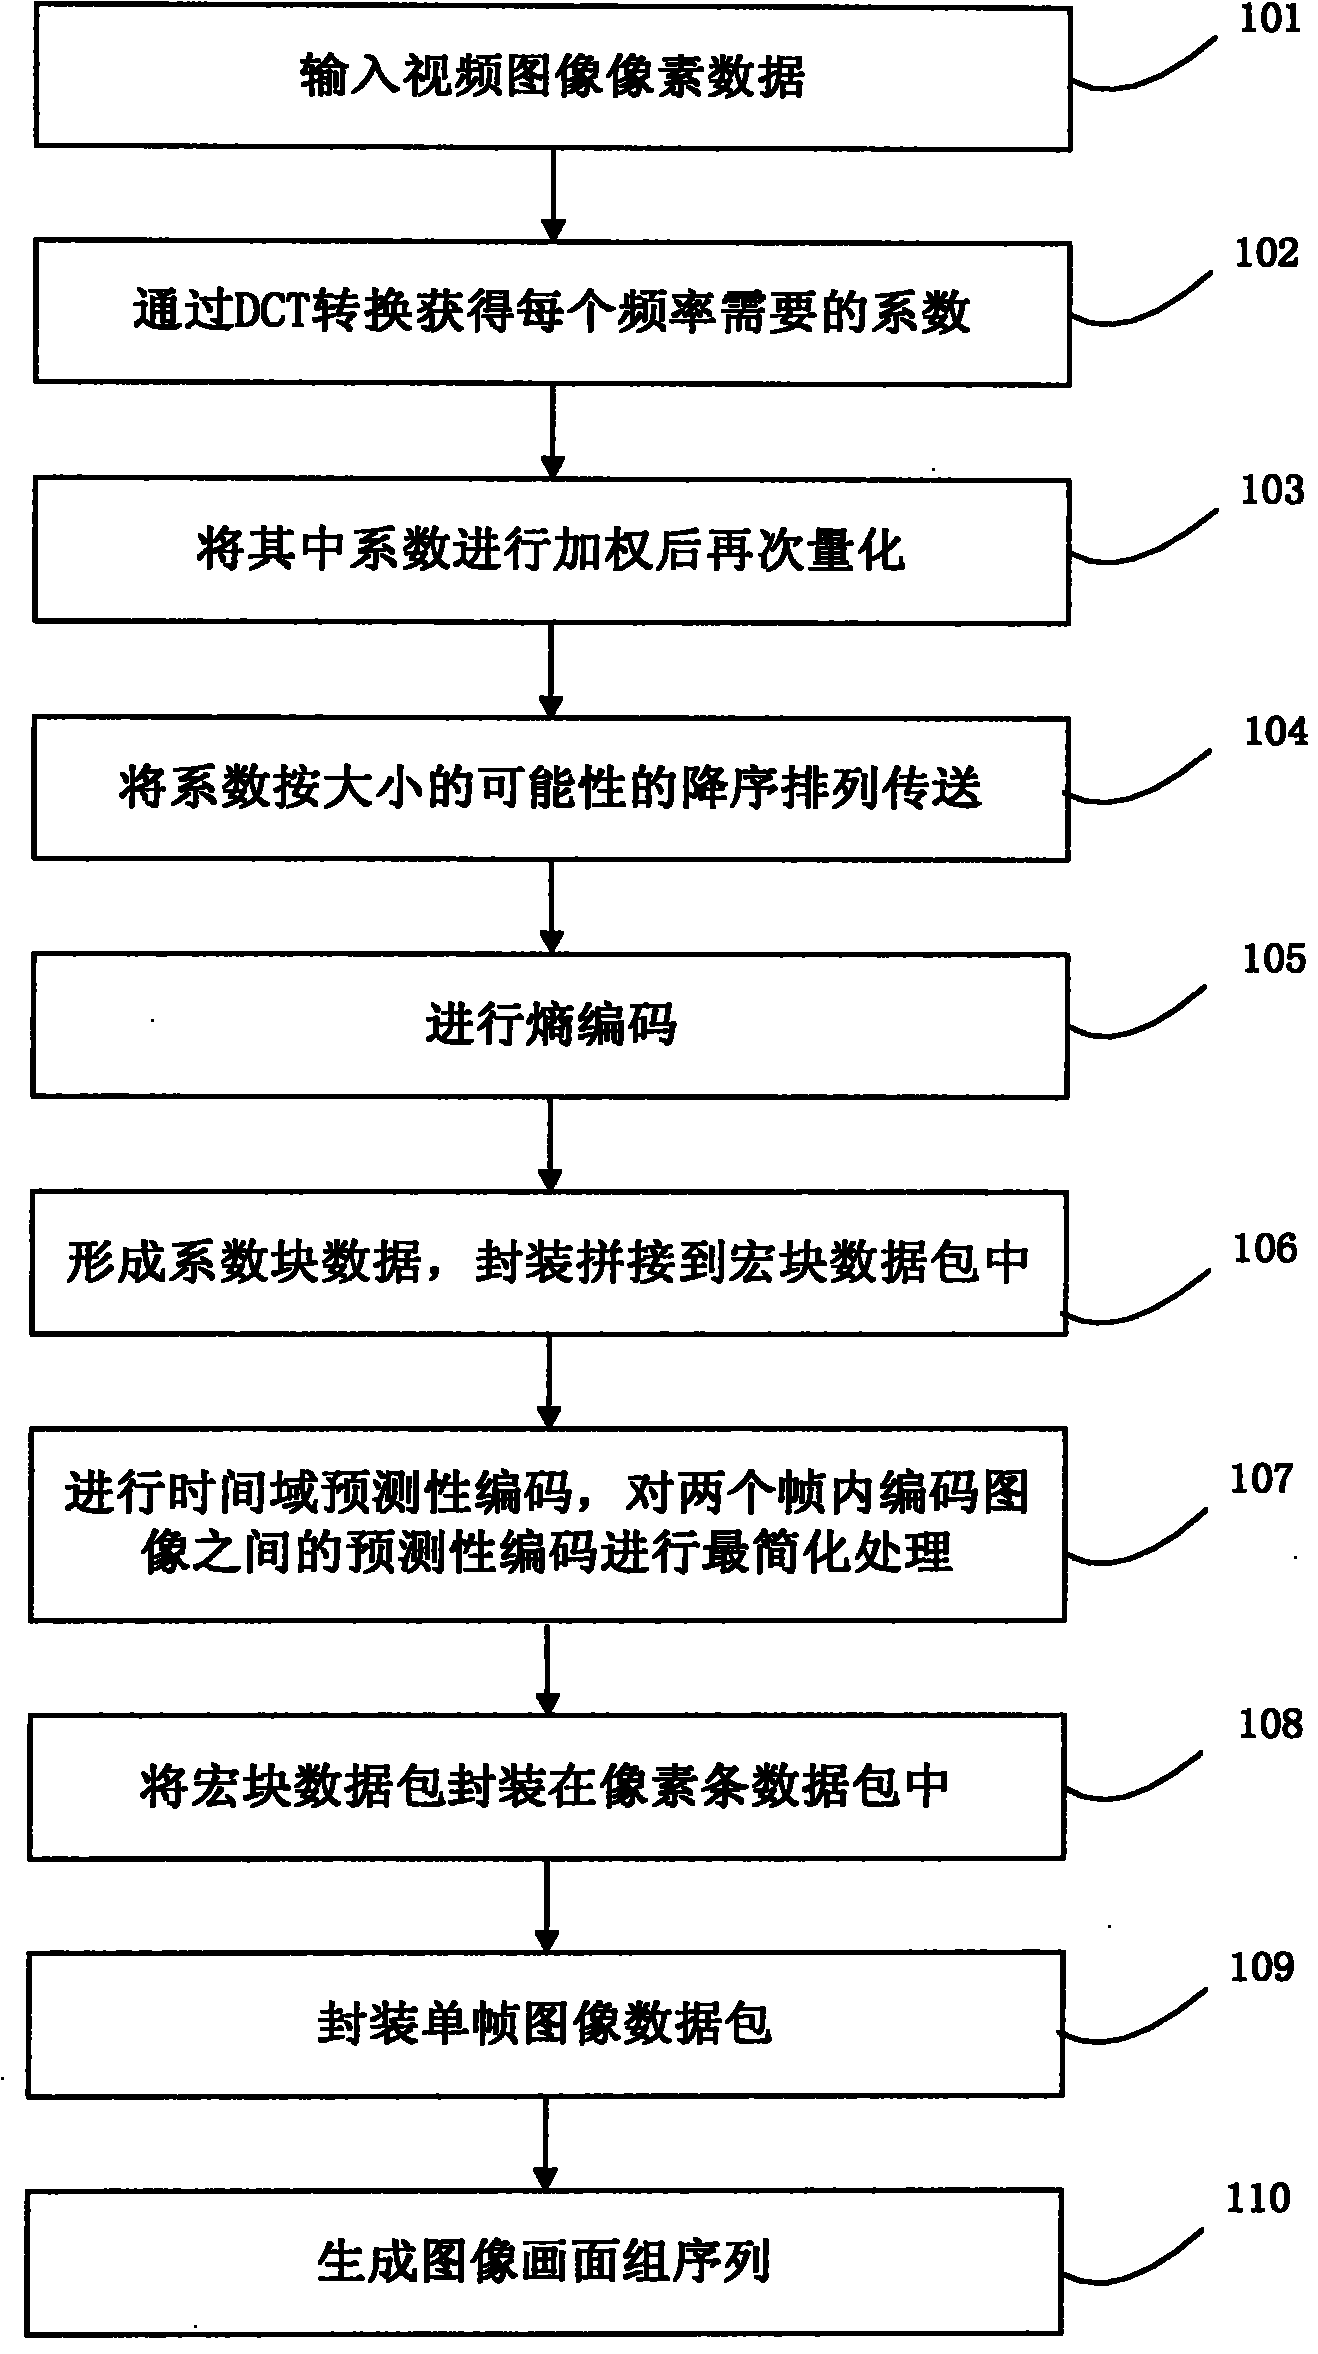 Compression coding method for signal source with low code rate